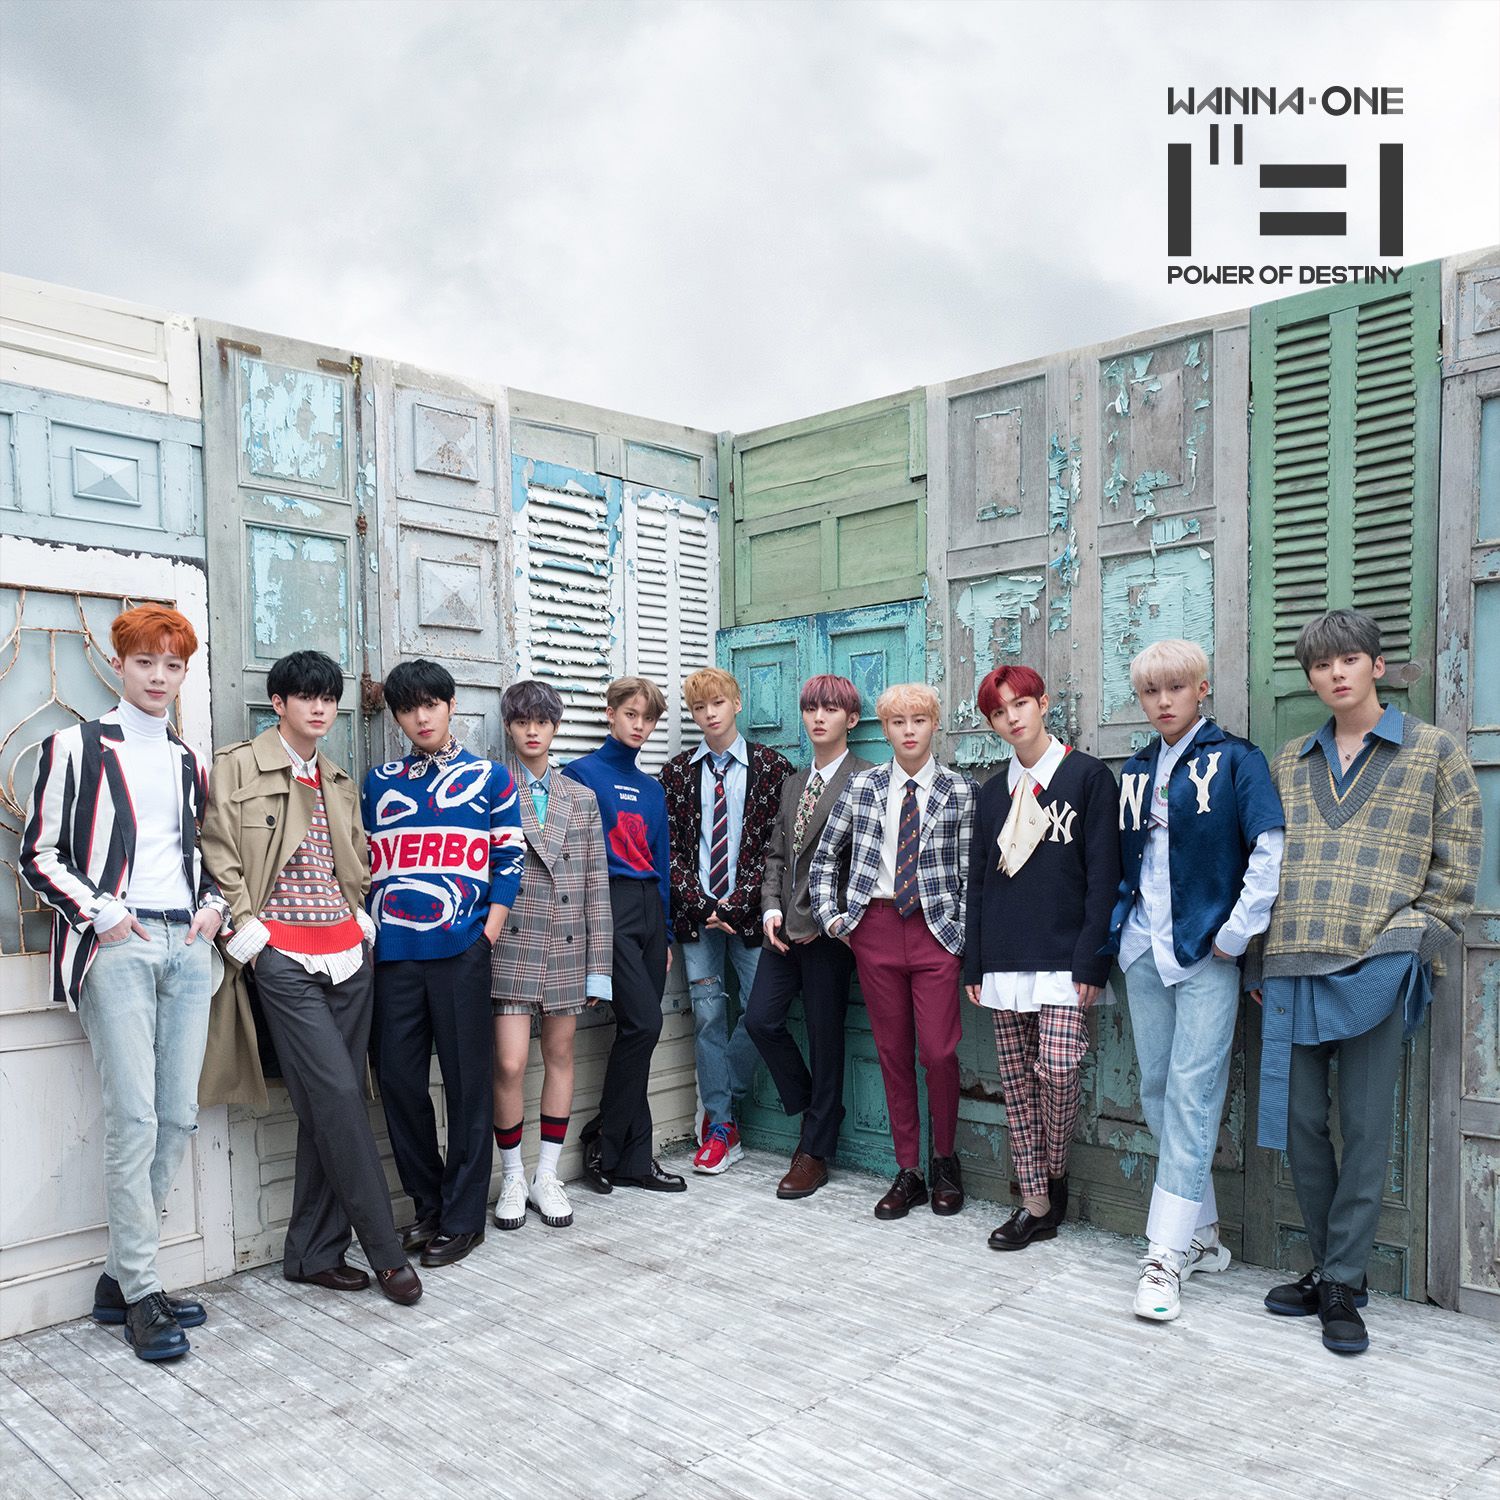 Wanna One released all the romance version teaser Images of its first full-length album 111=1 (POWER OF DESTINY) through official SNS from the 9th to the 11th.It has a charm that is 180 degrees different from the adventure teaser that emits charisma and masculine beauty in the background of mysterious space.It is captivating because it boasts a warm visual like the male protagonist of romance drama such as colorful yet eye-catching tie, dandy style jacket, knit and turtleneck with warm warmth.111=1 (POWER OF DESTINY), released on the 19th, is Wanna Ones first Music album, which shaped Wanna Ones willingness to pioneer the fate given by Wanna One, which has been showing the arithmetic series such as 1x=1, 0+1=1, 1-1=0 and 1X1=1.The title song Spring Wind is a song that contains the fate (DESTINY) that you and I have missed each other as one, but the will to meet again and become one again in fighting against the fate, and hopes to show the musicality of Wanna One, which has grown even more.Wanna Ones first full-length album, 111=1 (POWER OF DESTINY), will be released on the 19th.